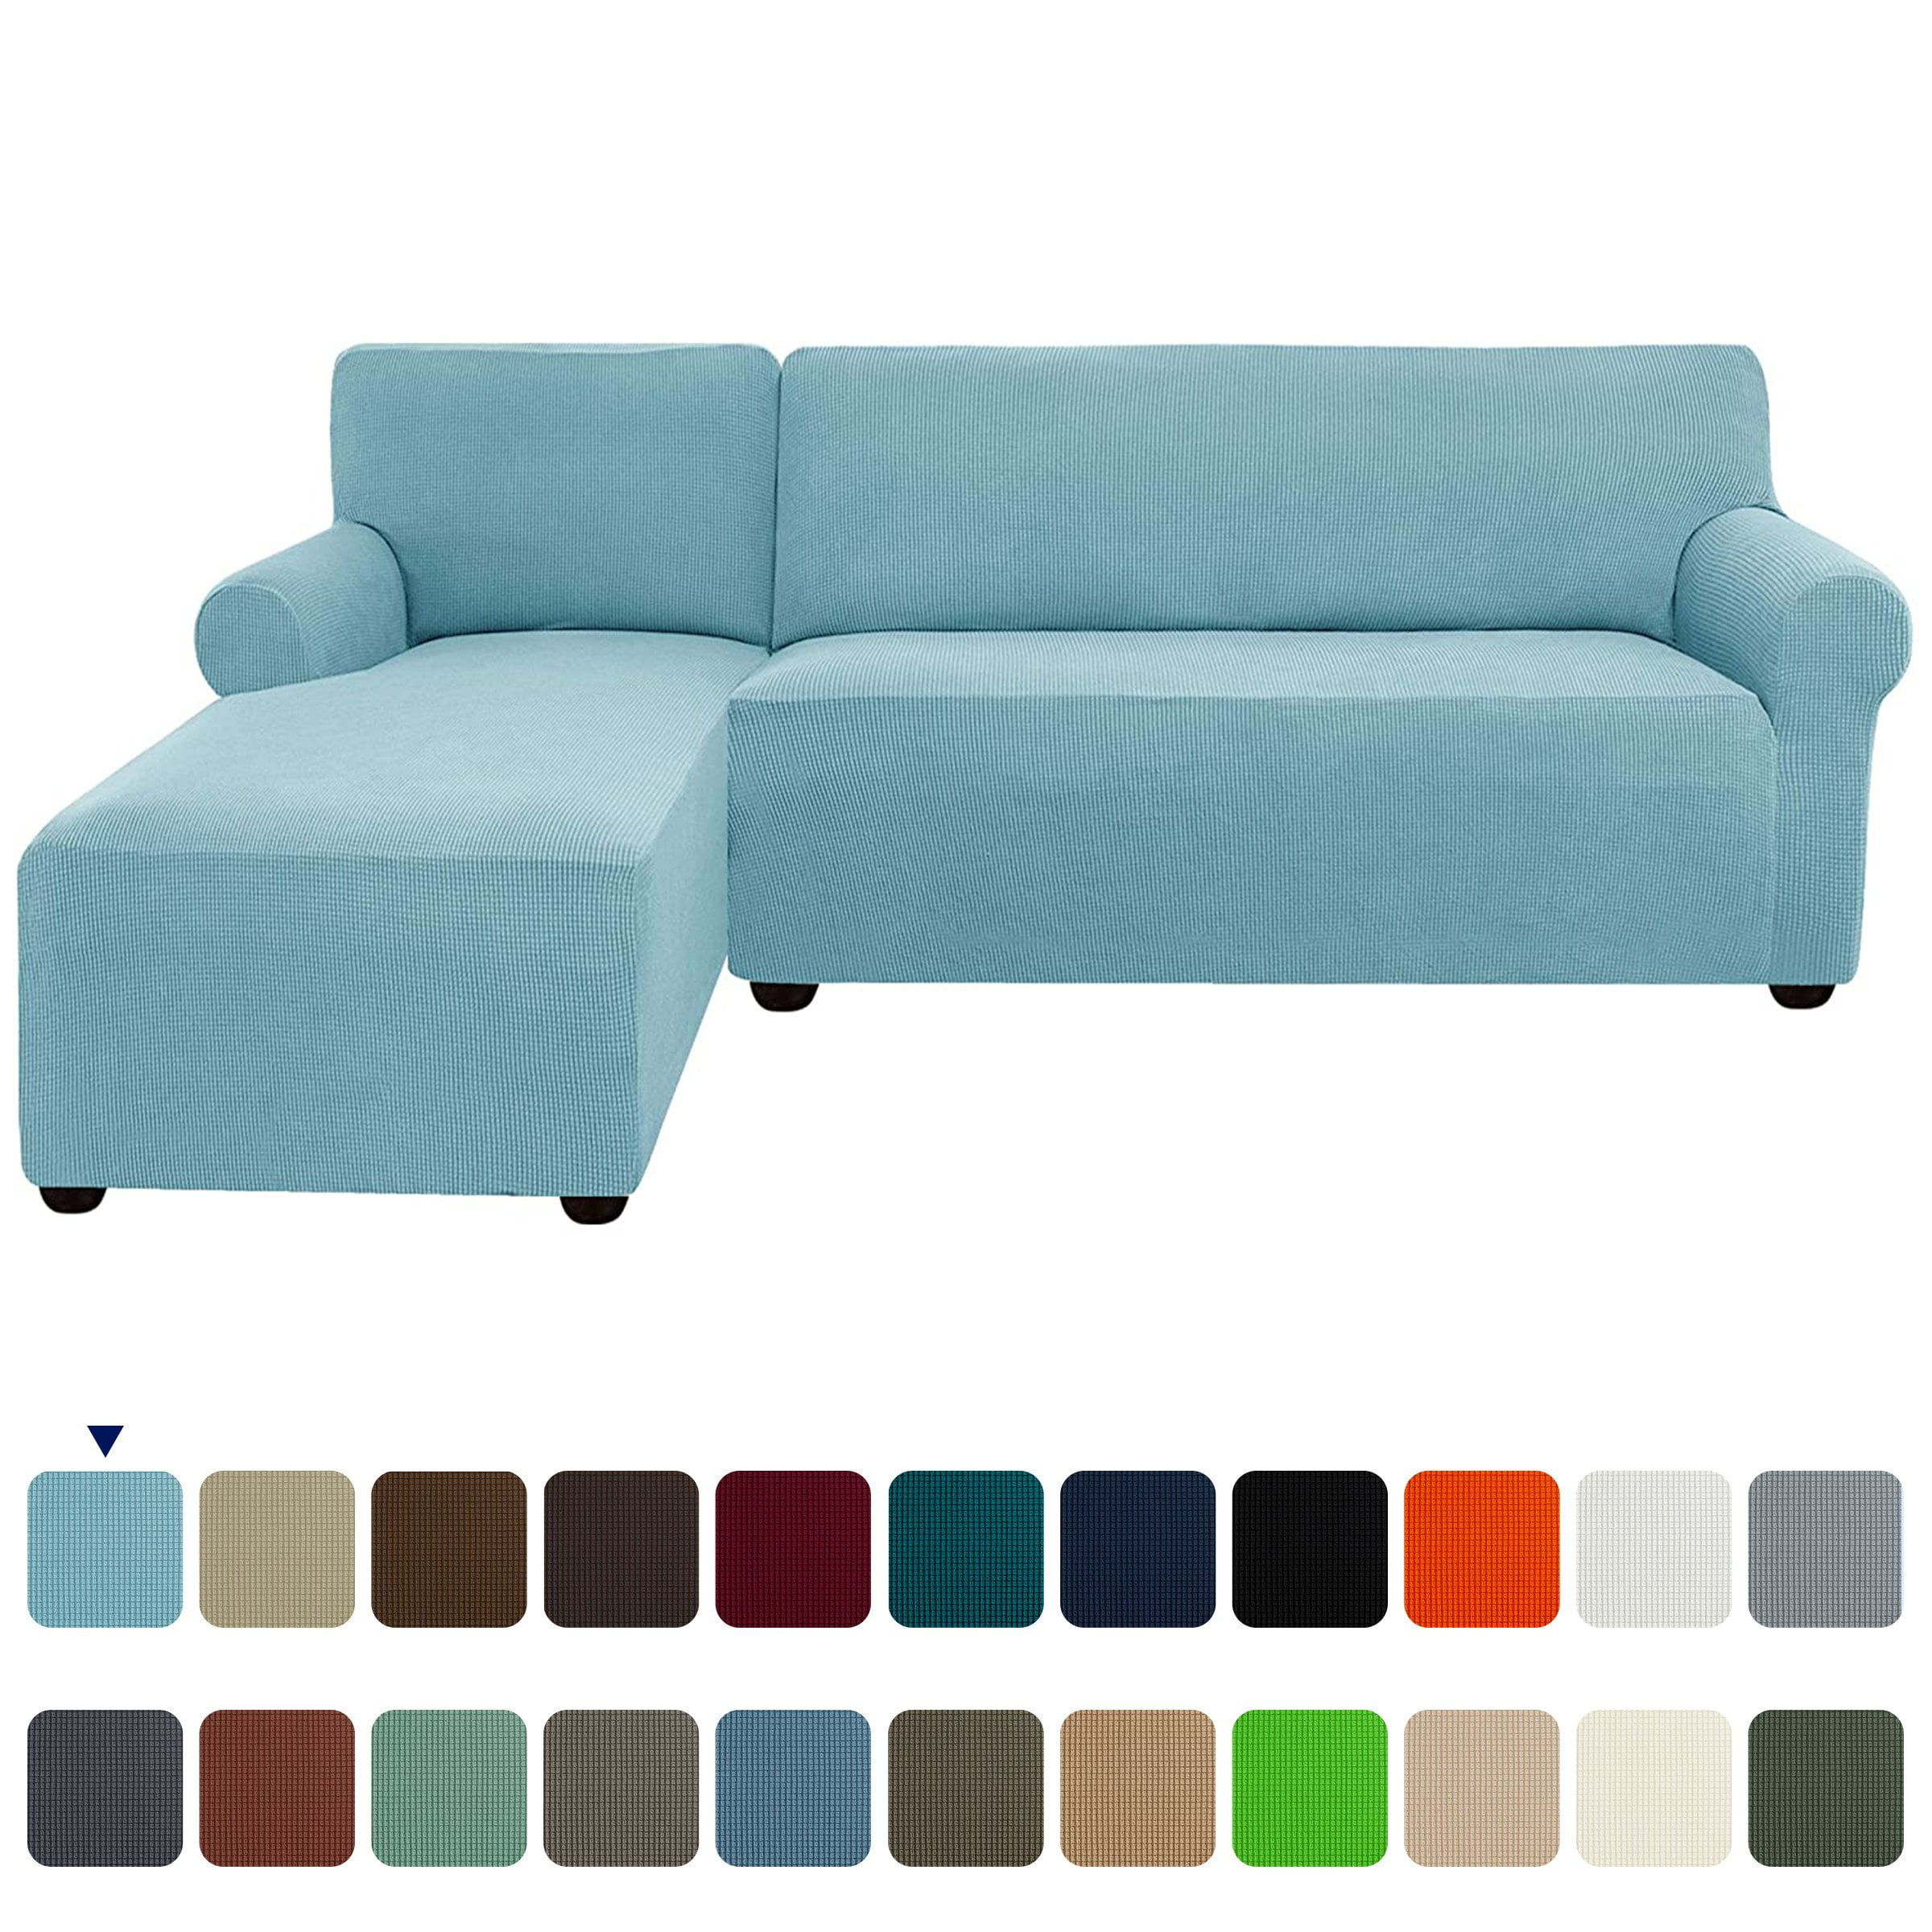 SOLID COLOR LOVESEAT FURNITURE THROW COVER 70 Inches x 120 Inches 